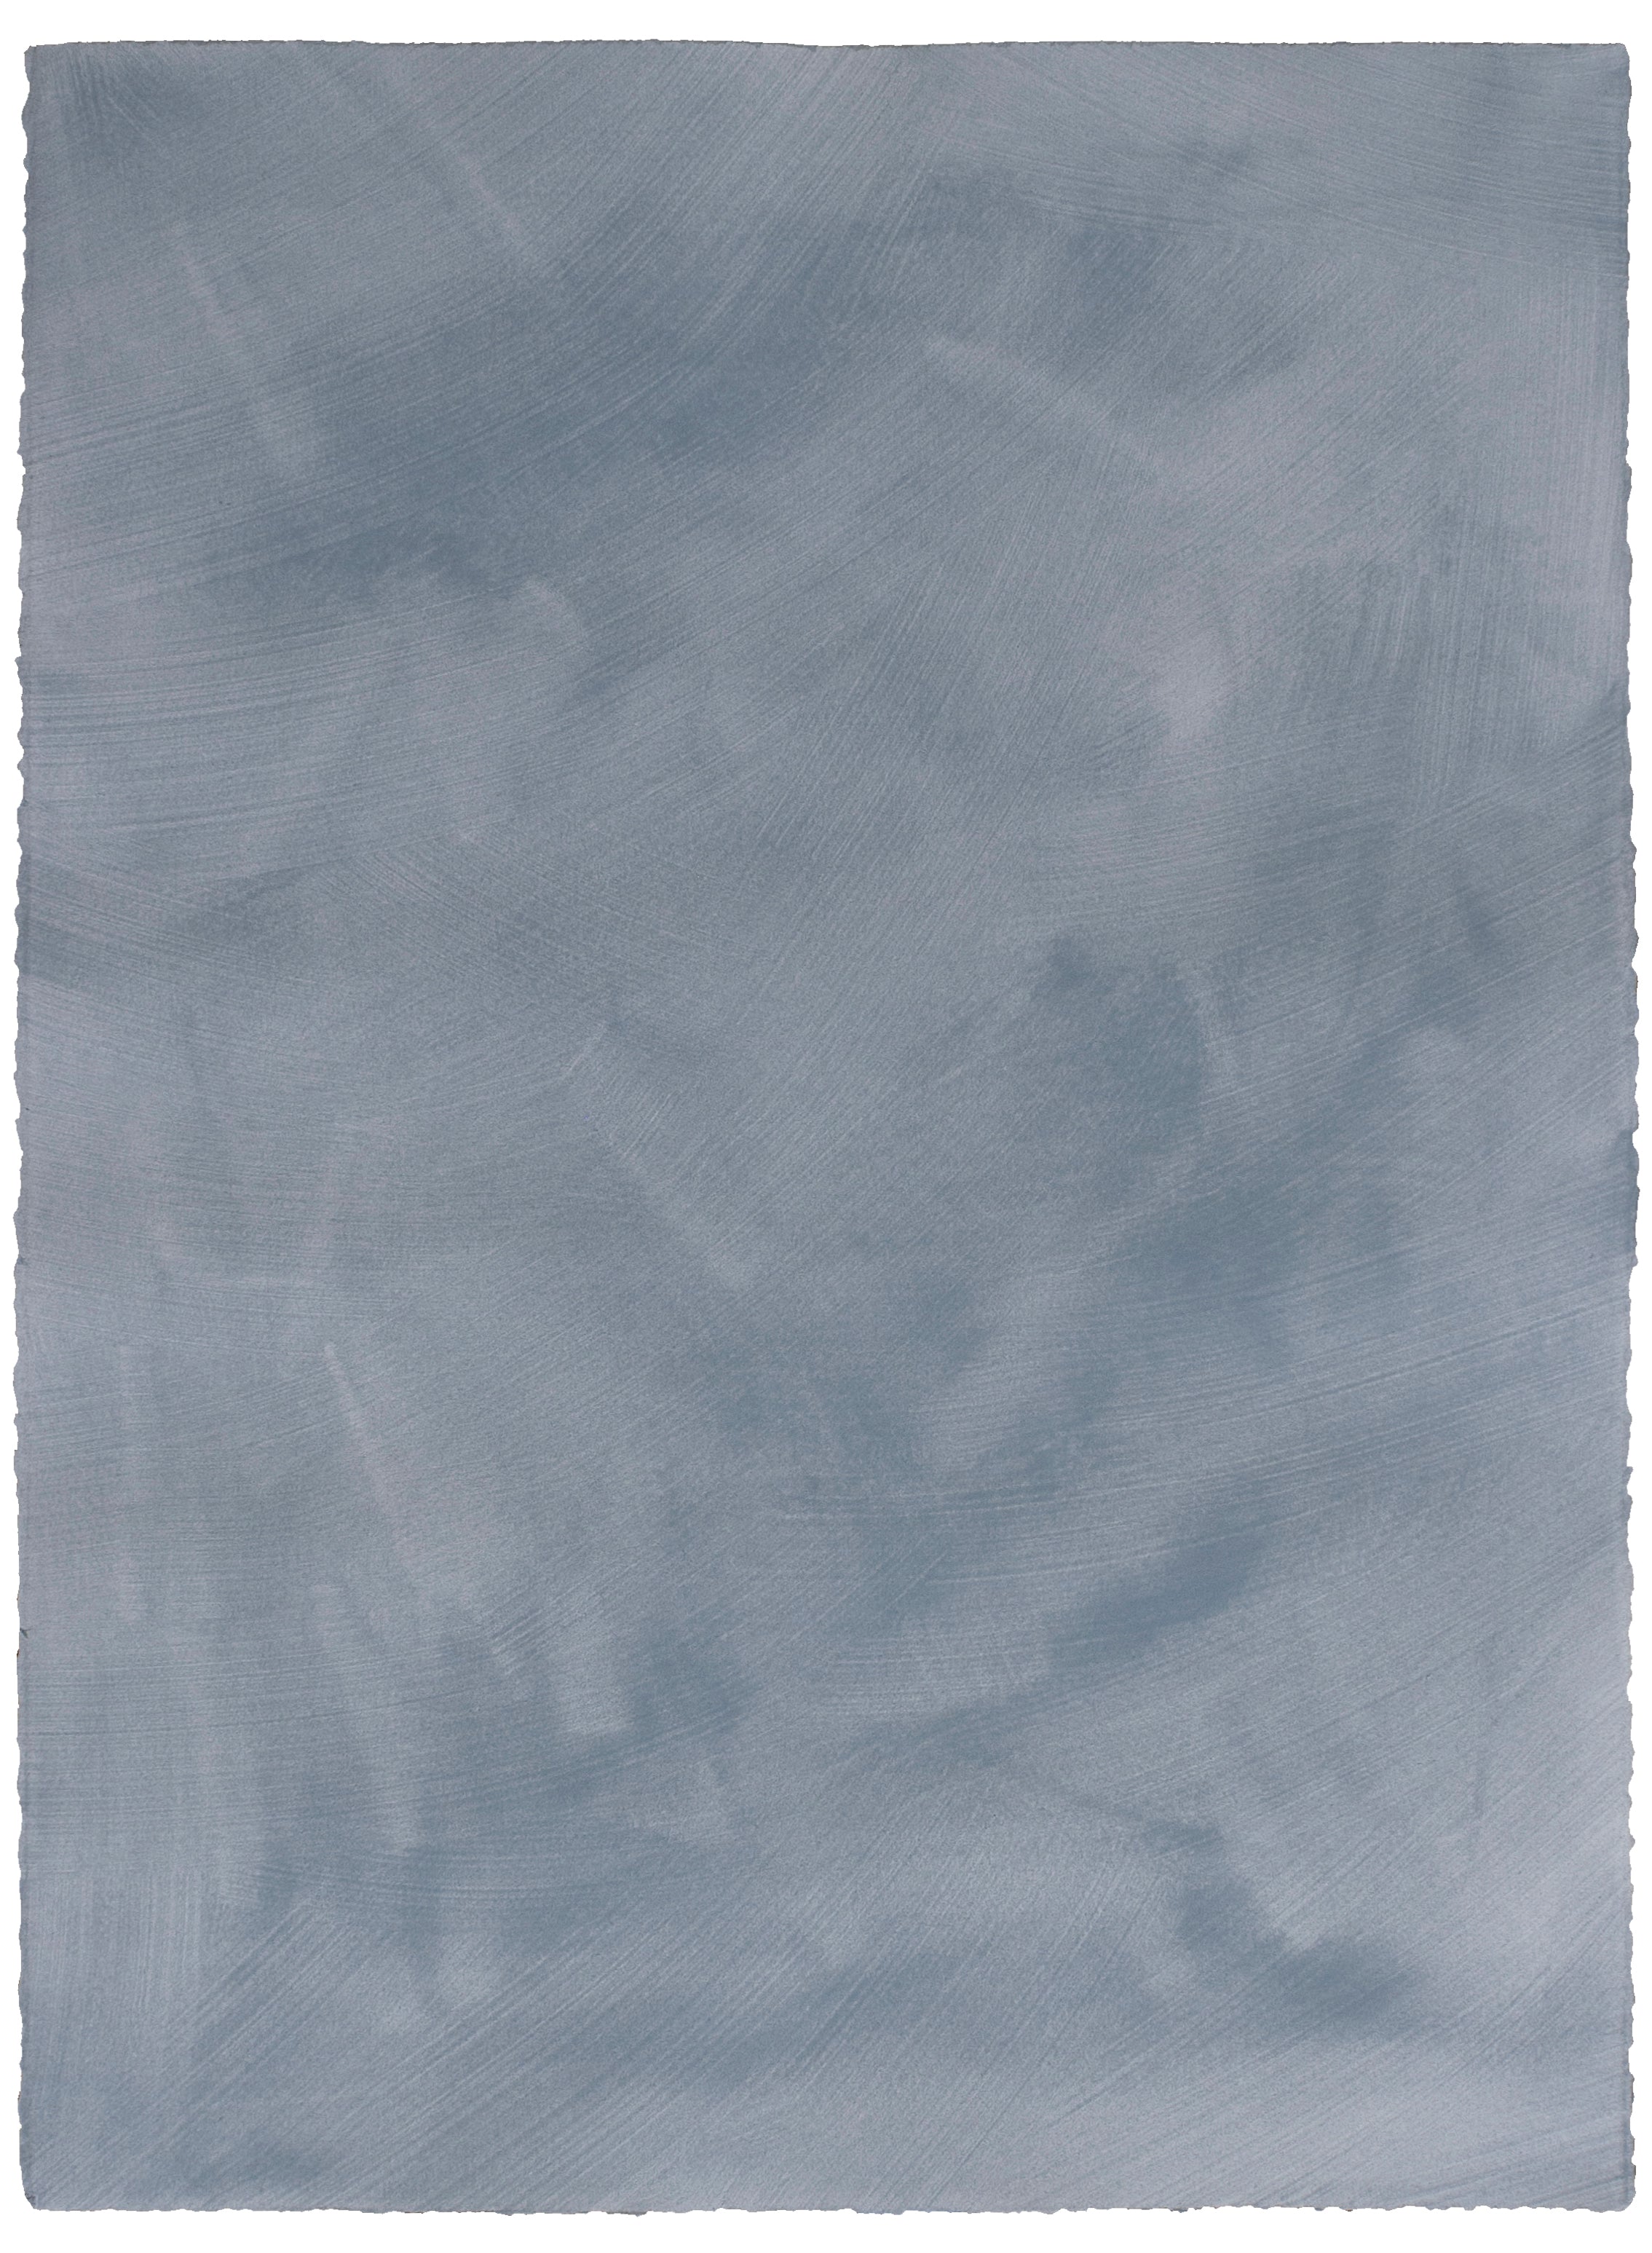 Sheet of hand-painted wallpaper in blue gray with an irregular brushed texture.